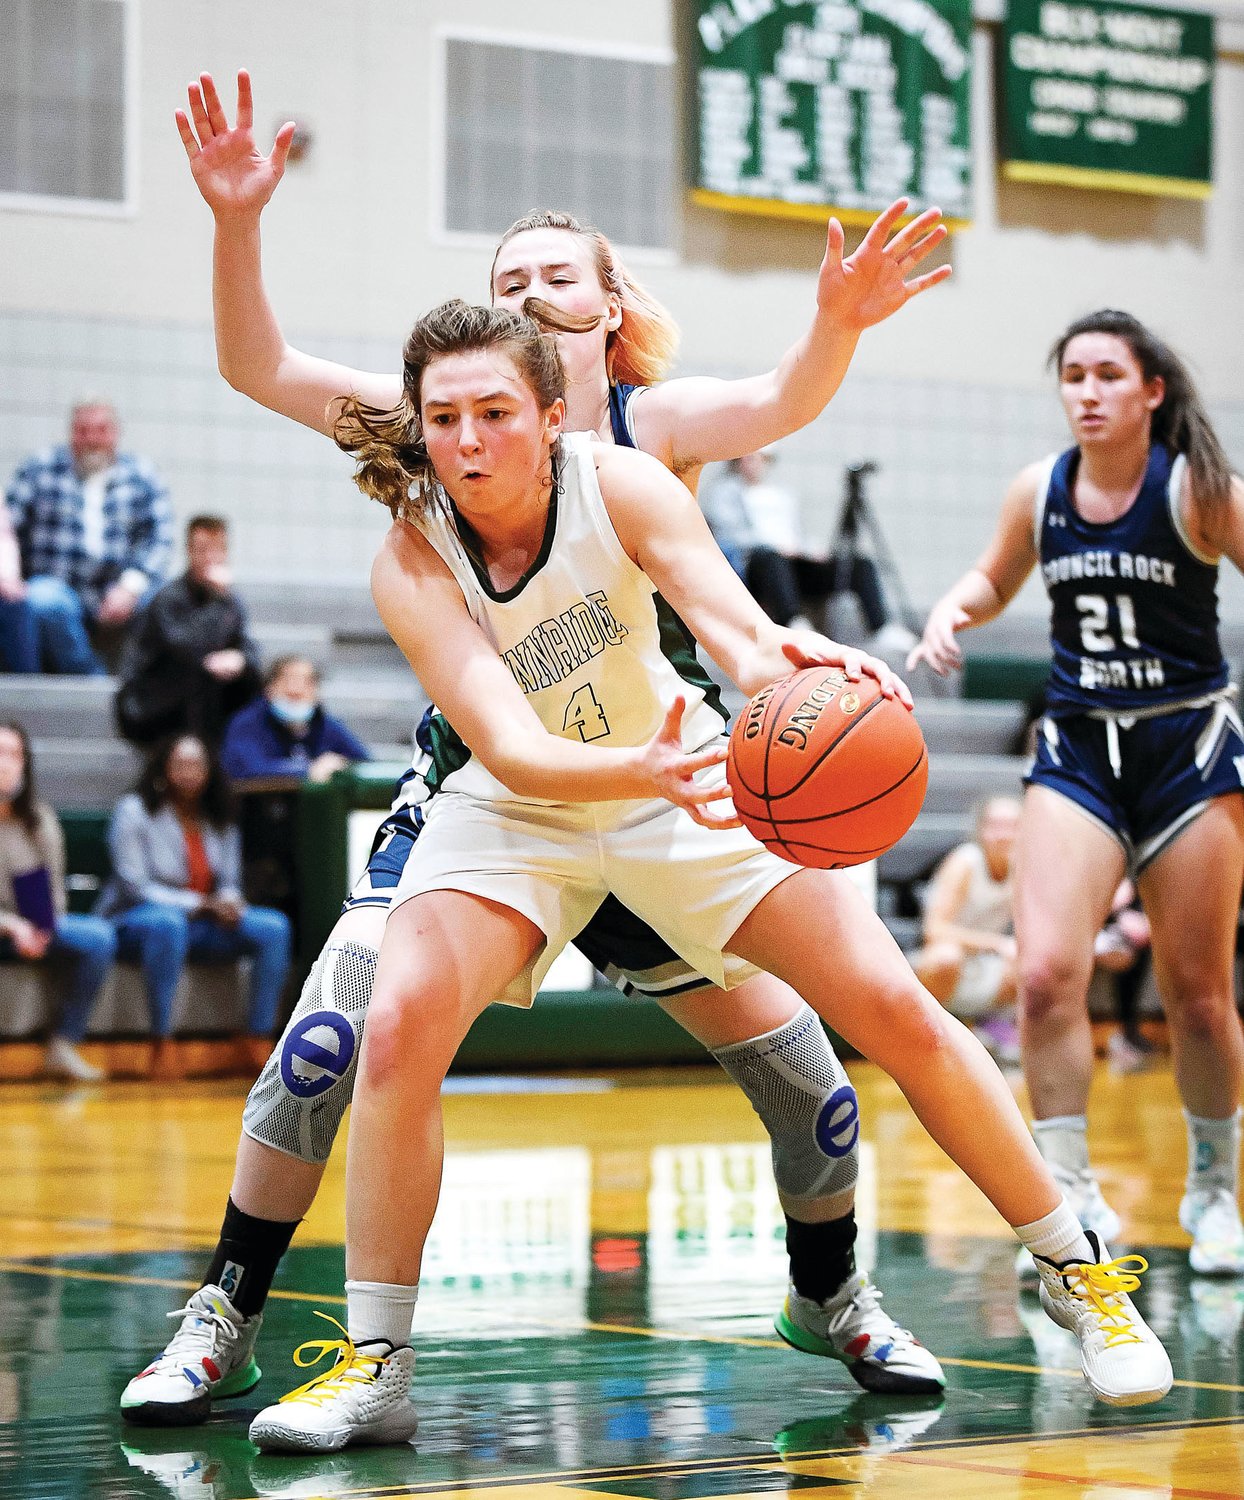 Pennridge’s Katie Yoder, the game’s high scorer, gets a pass down in the paint in front of CR North’s Ruth O’Keeffe.